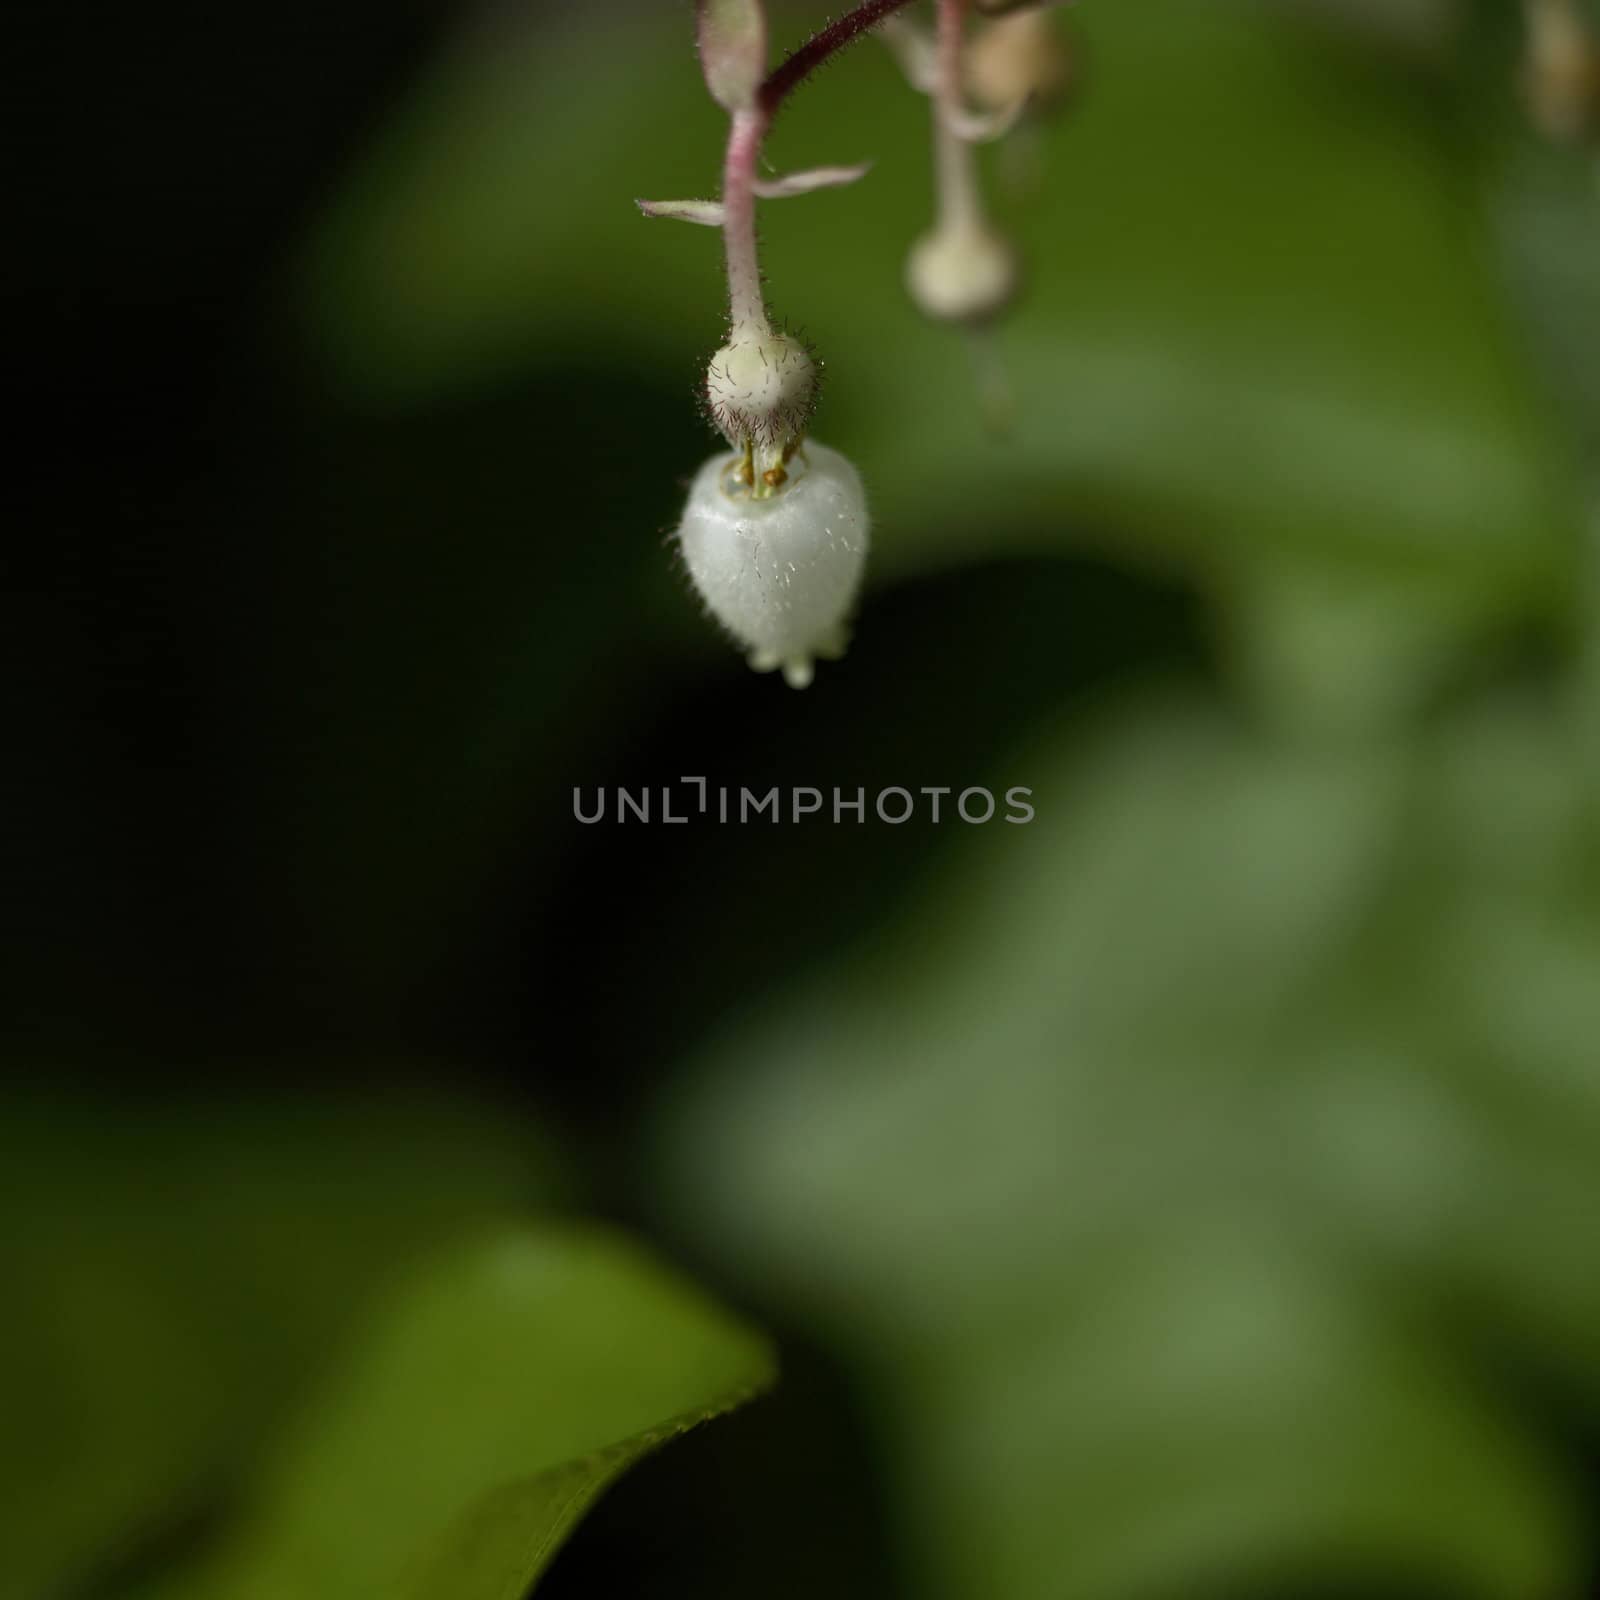 White Salal by mmm